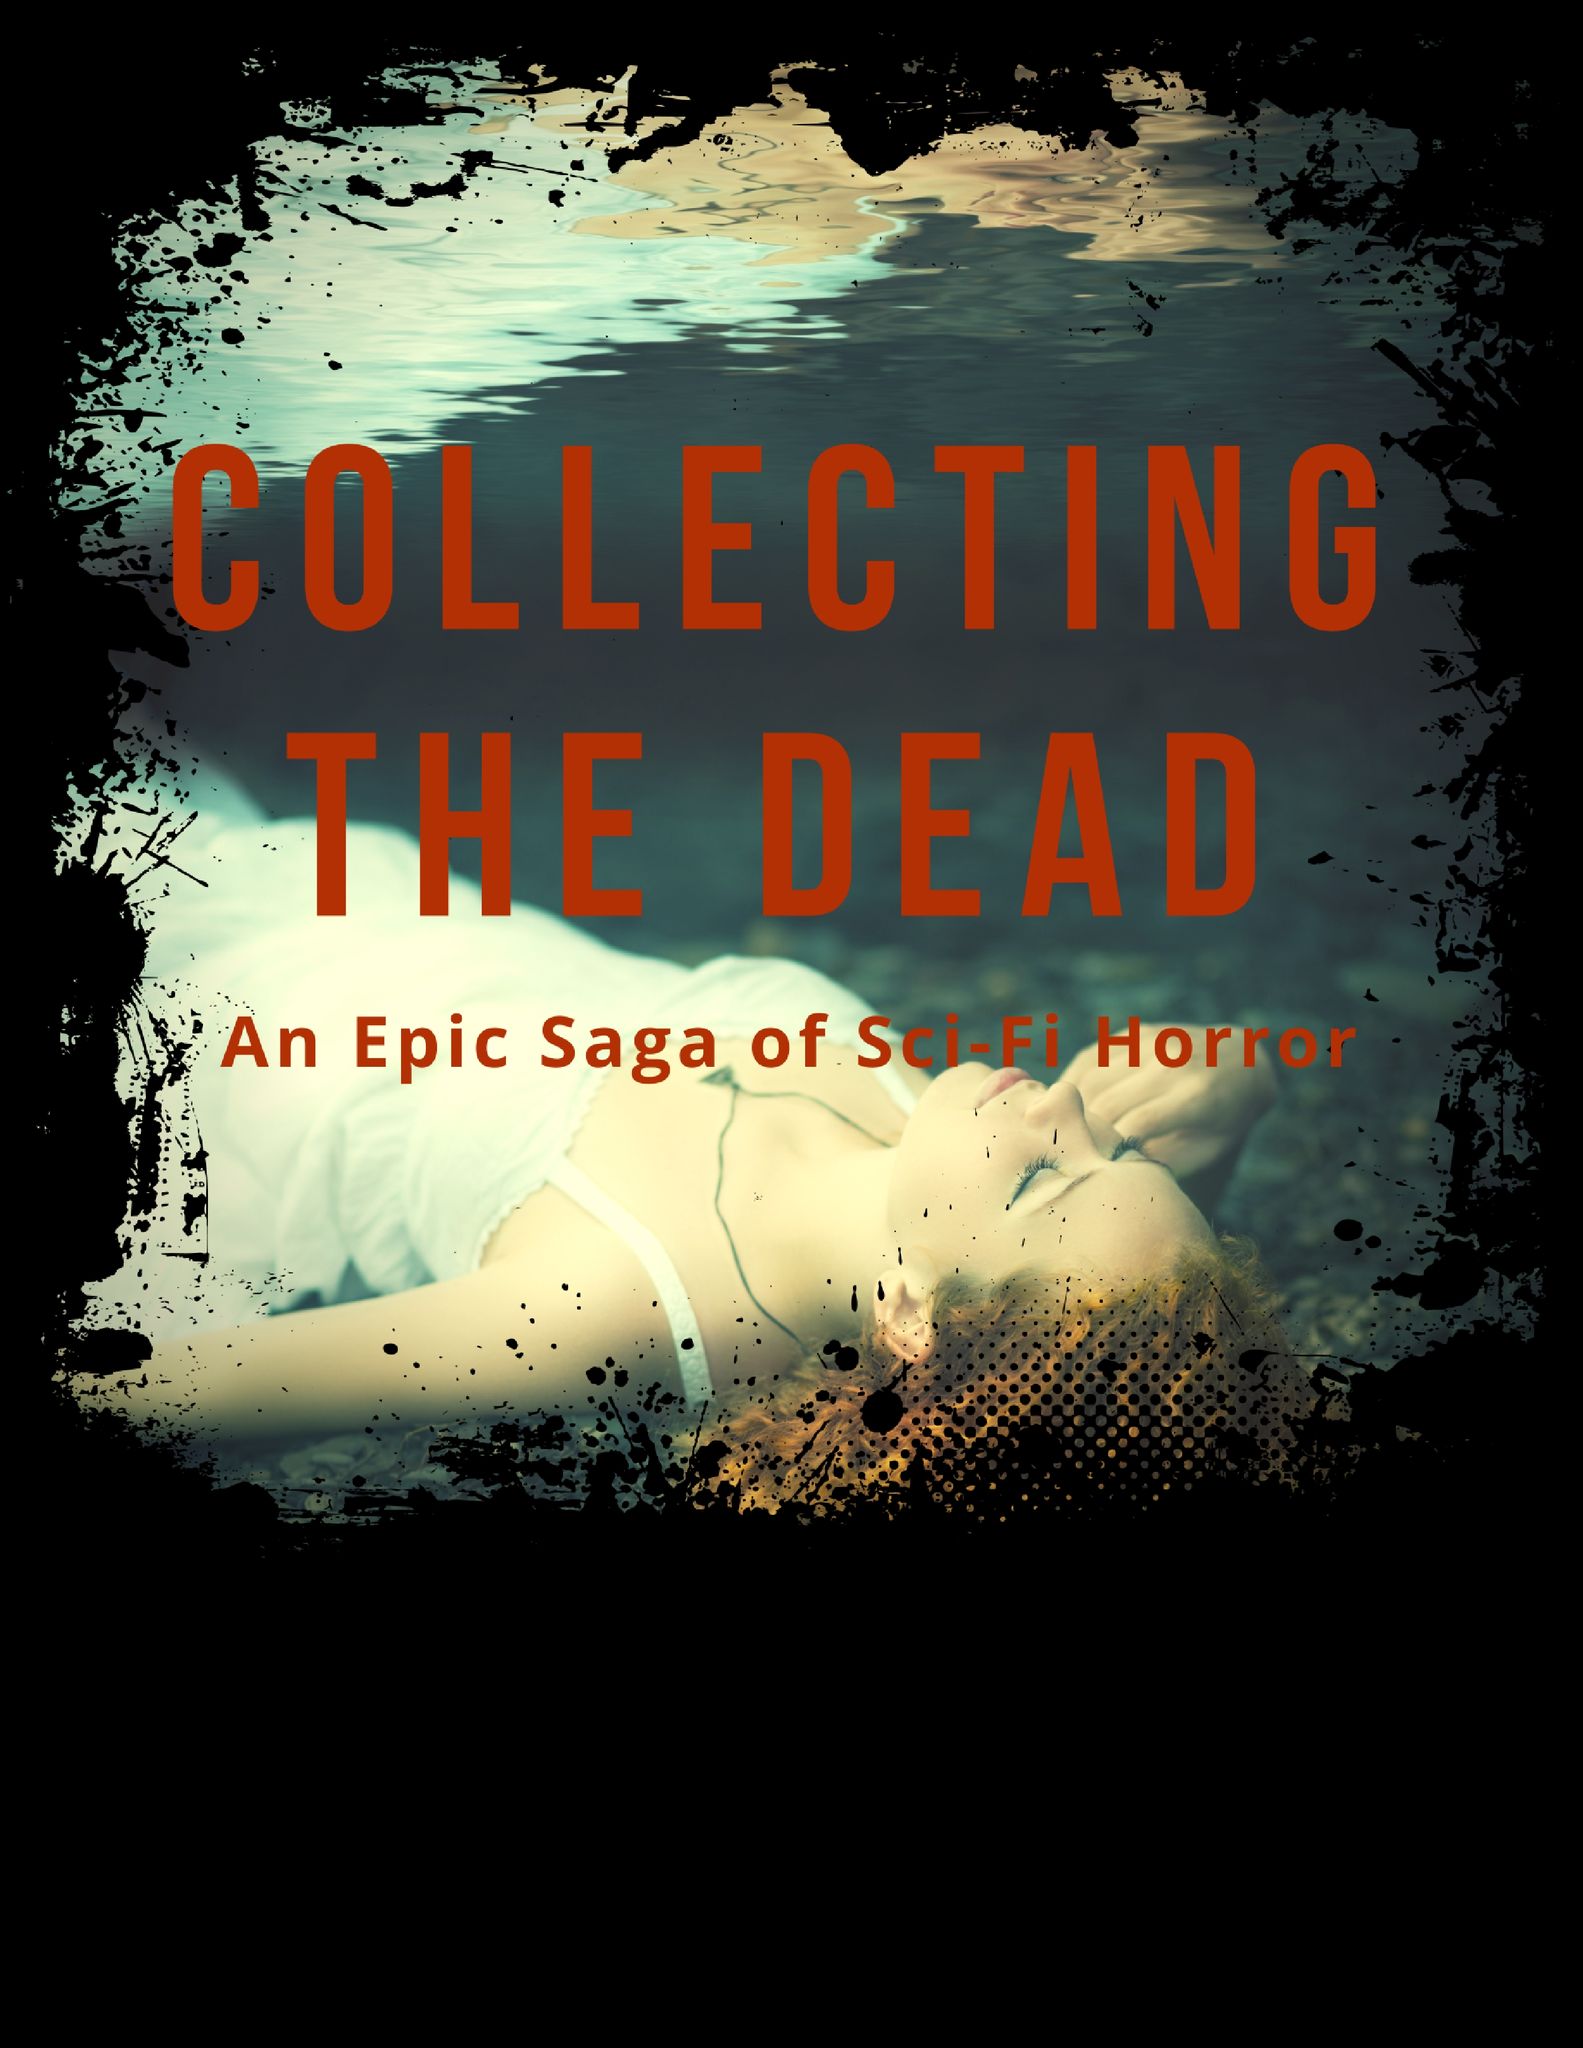 COLLECTING THE DEAD BY PATRICIA HICKMAN